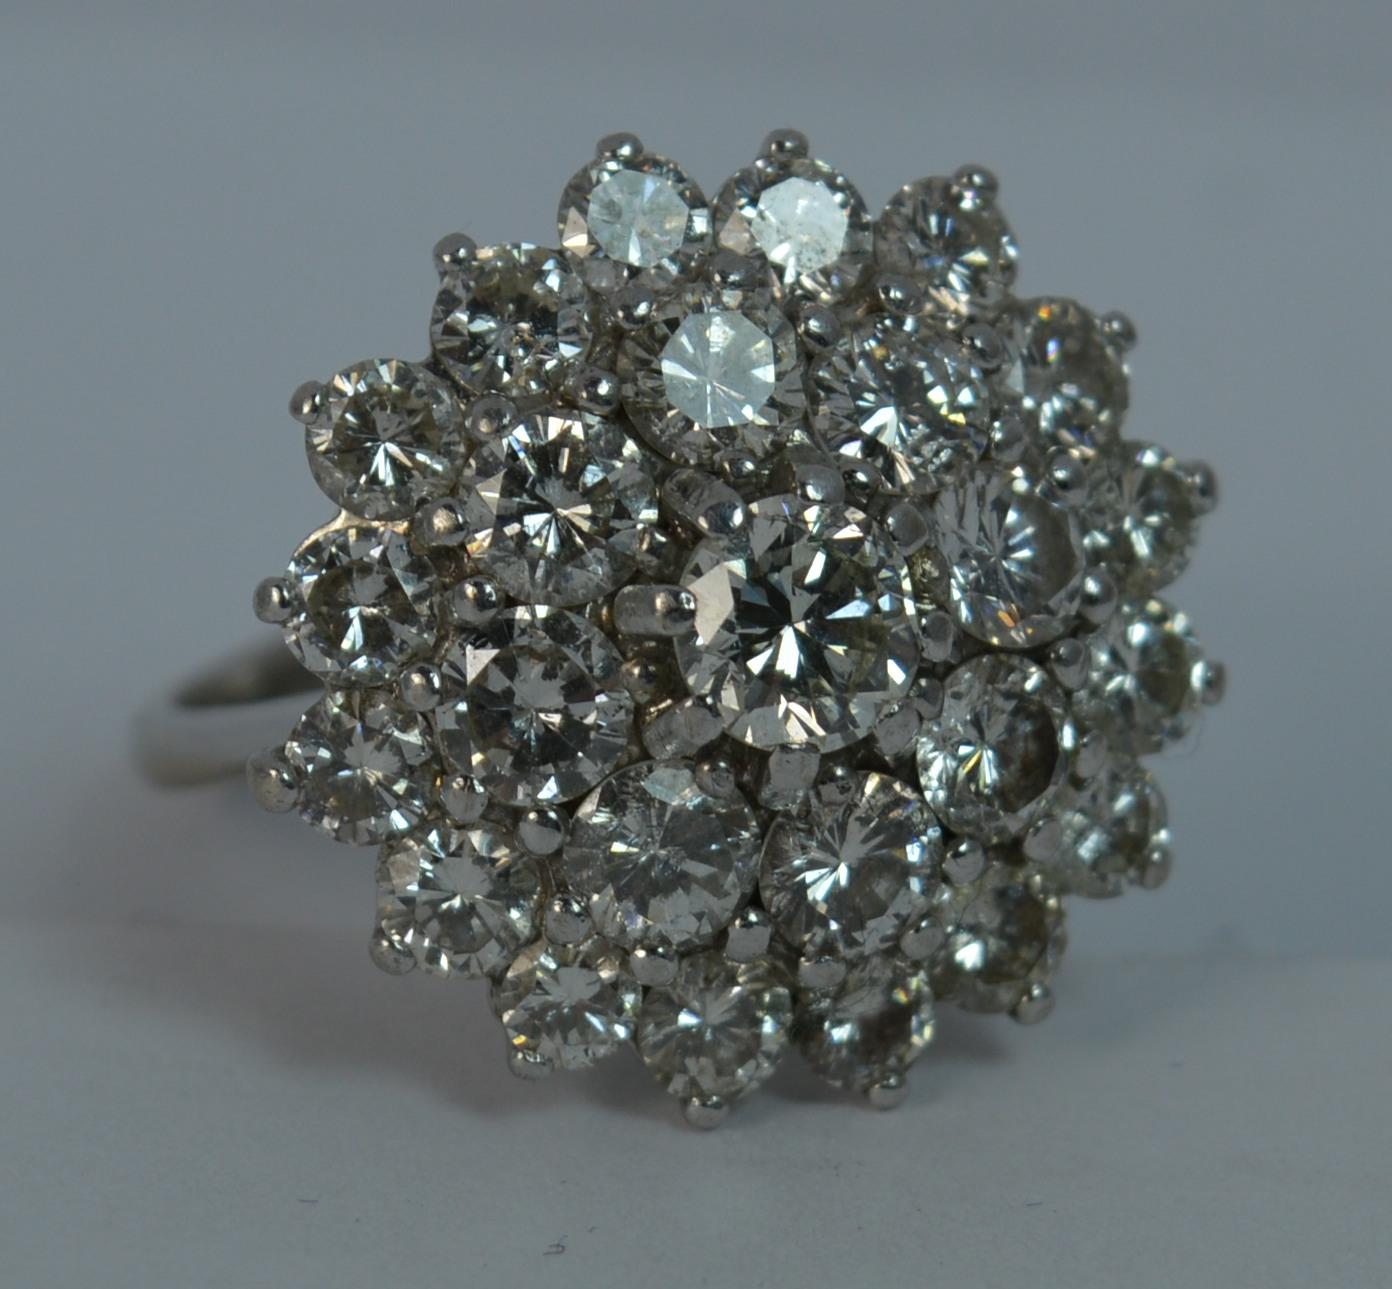 Bling 18 Carat White Gold and 2.75 Carat Diamond Cluster Cocktail Ring 7